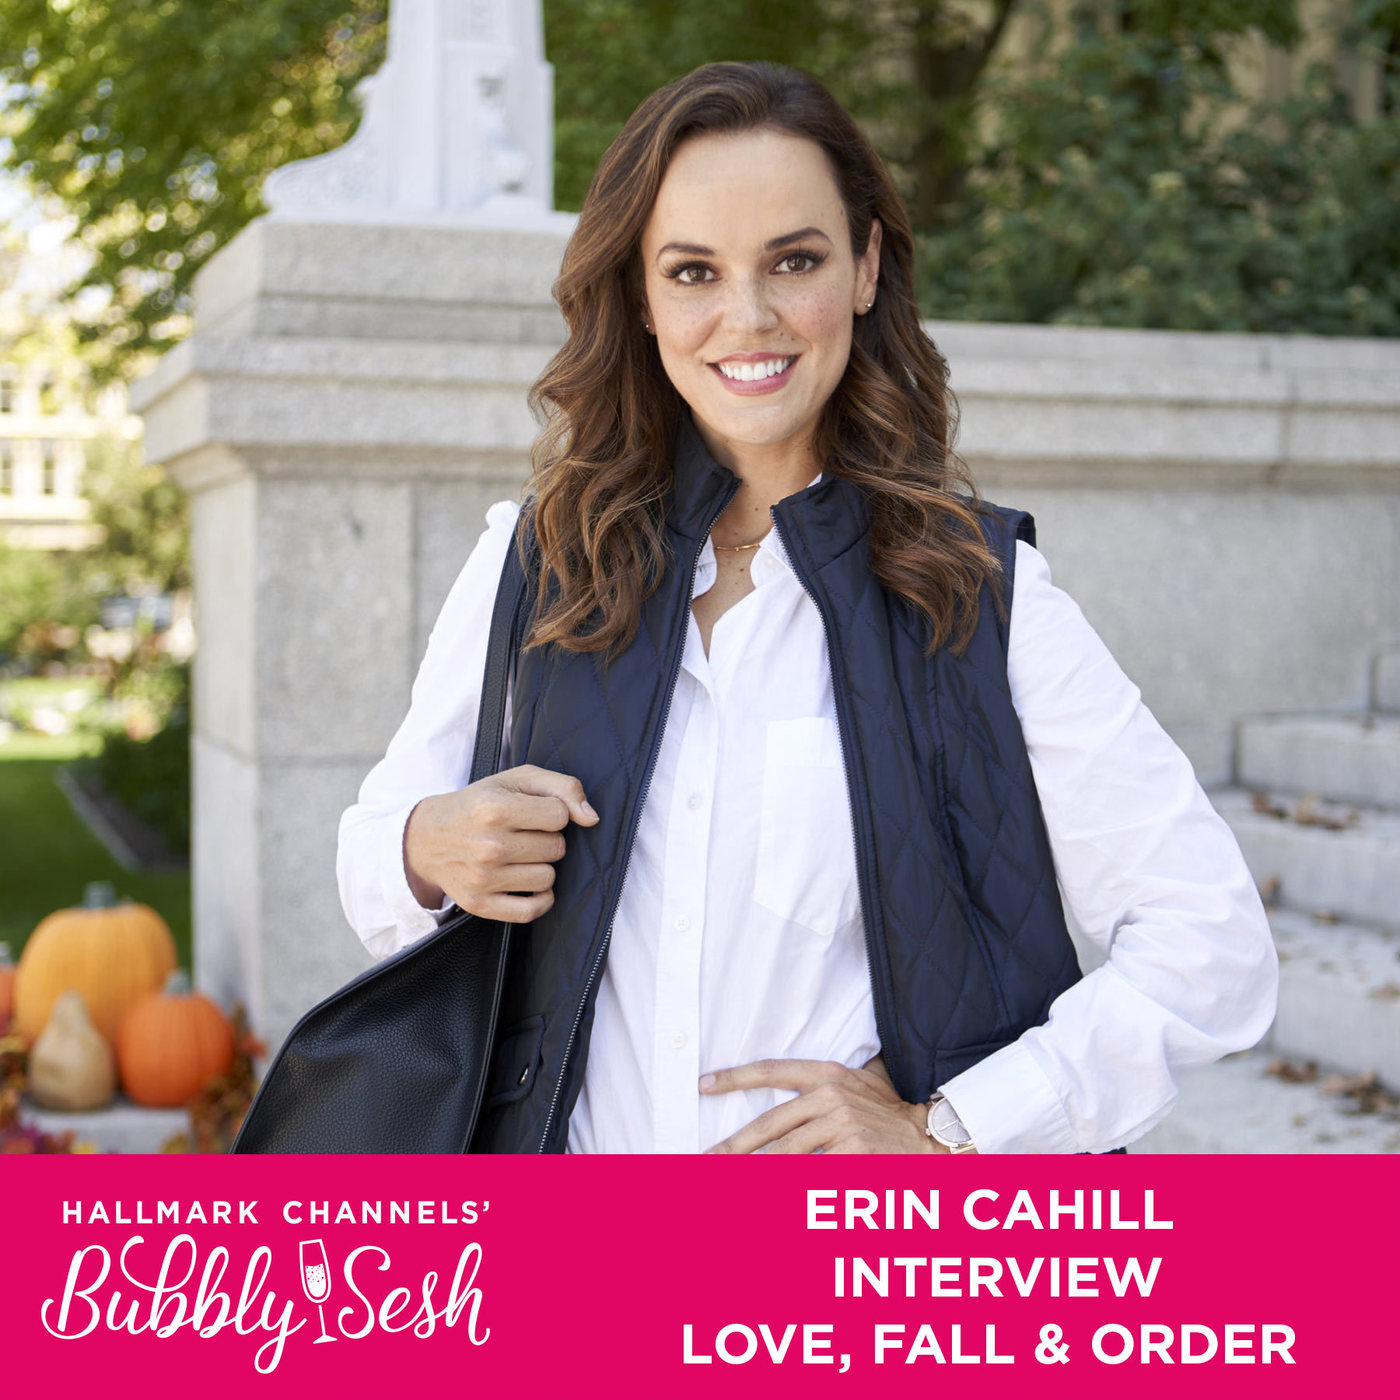 Erin Cahill Interview - Love, Fall & Order  